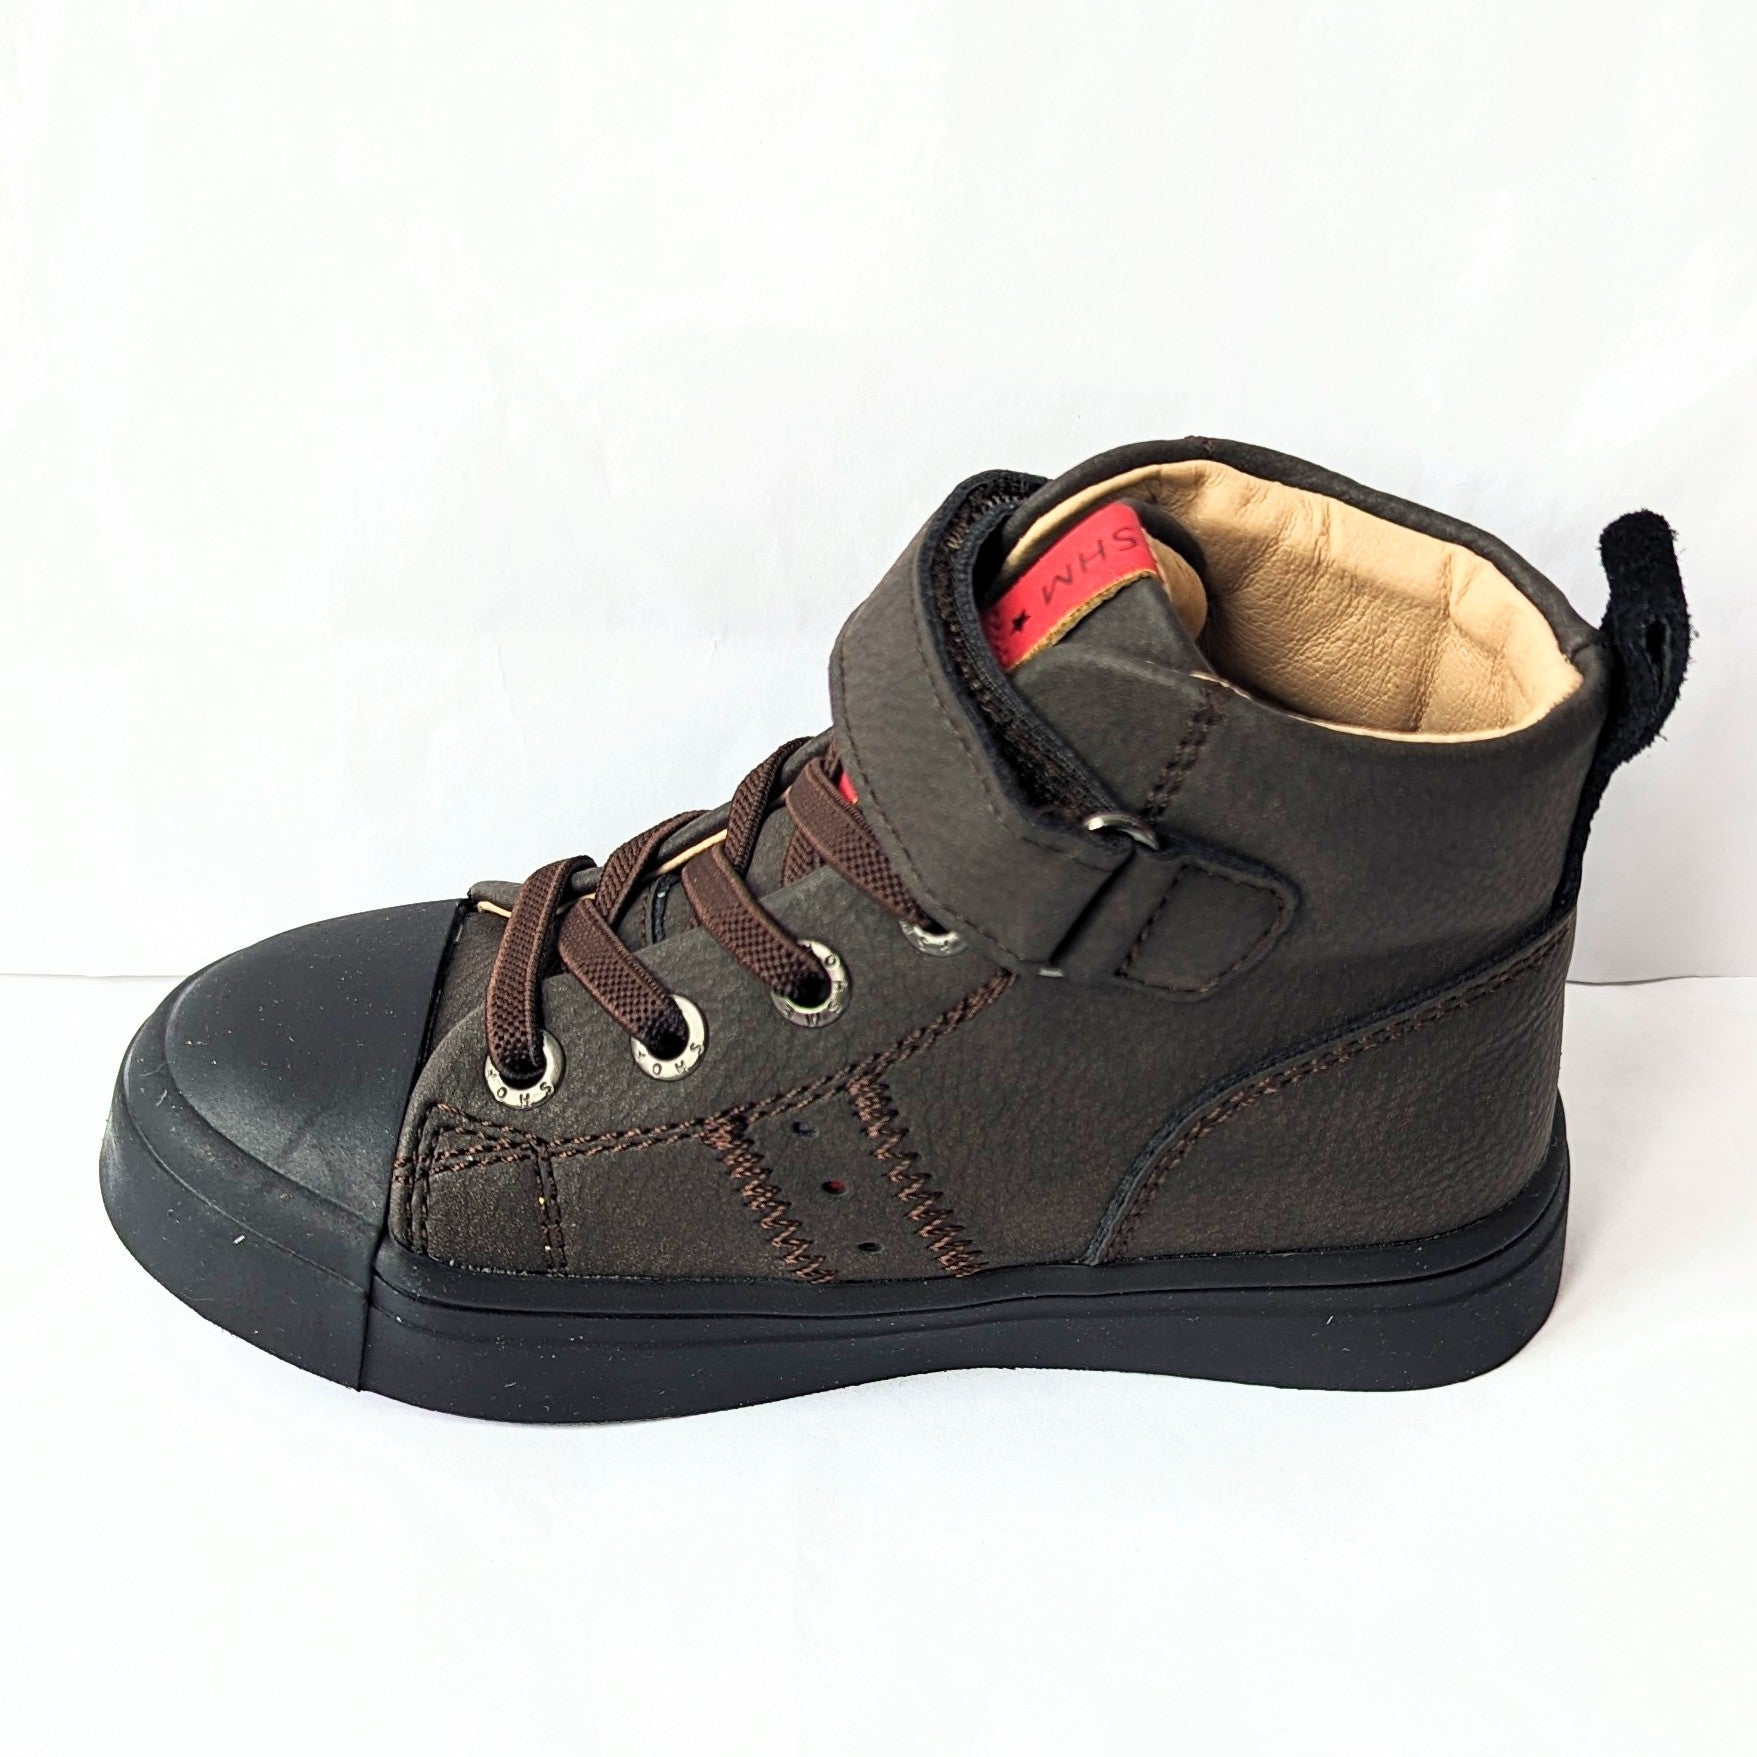 A hi-top unisex boot by Shoesme, style SH23W024-D, with toe bumper and elastic lace and velcro fastening. View of left side.